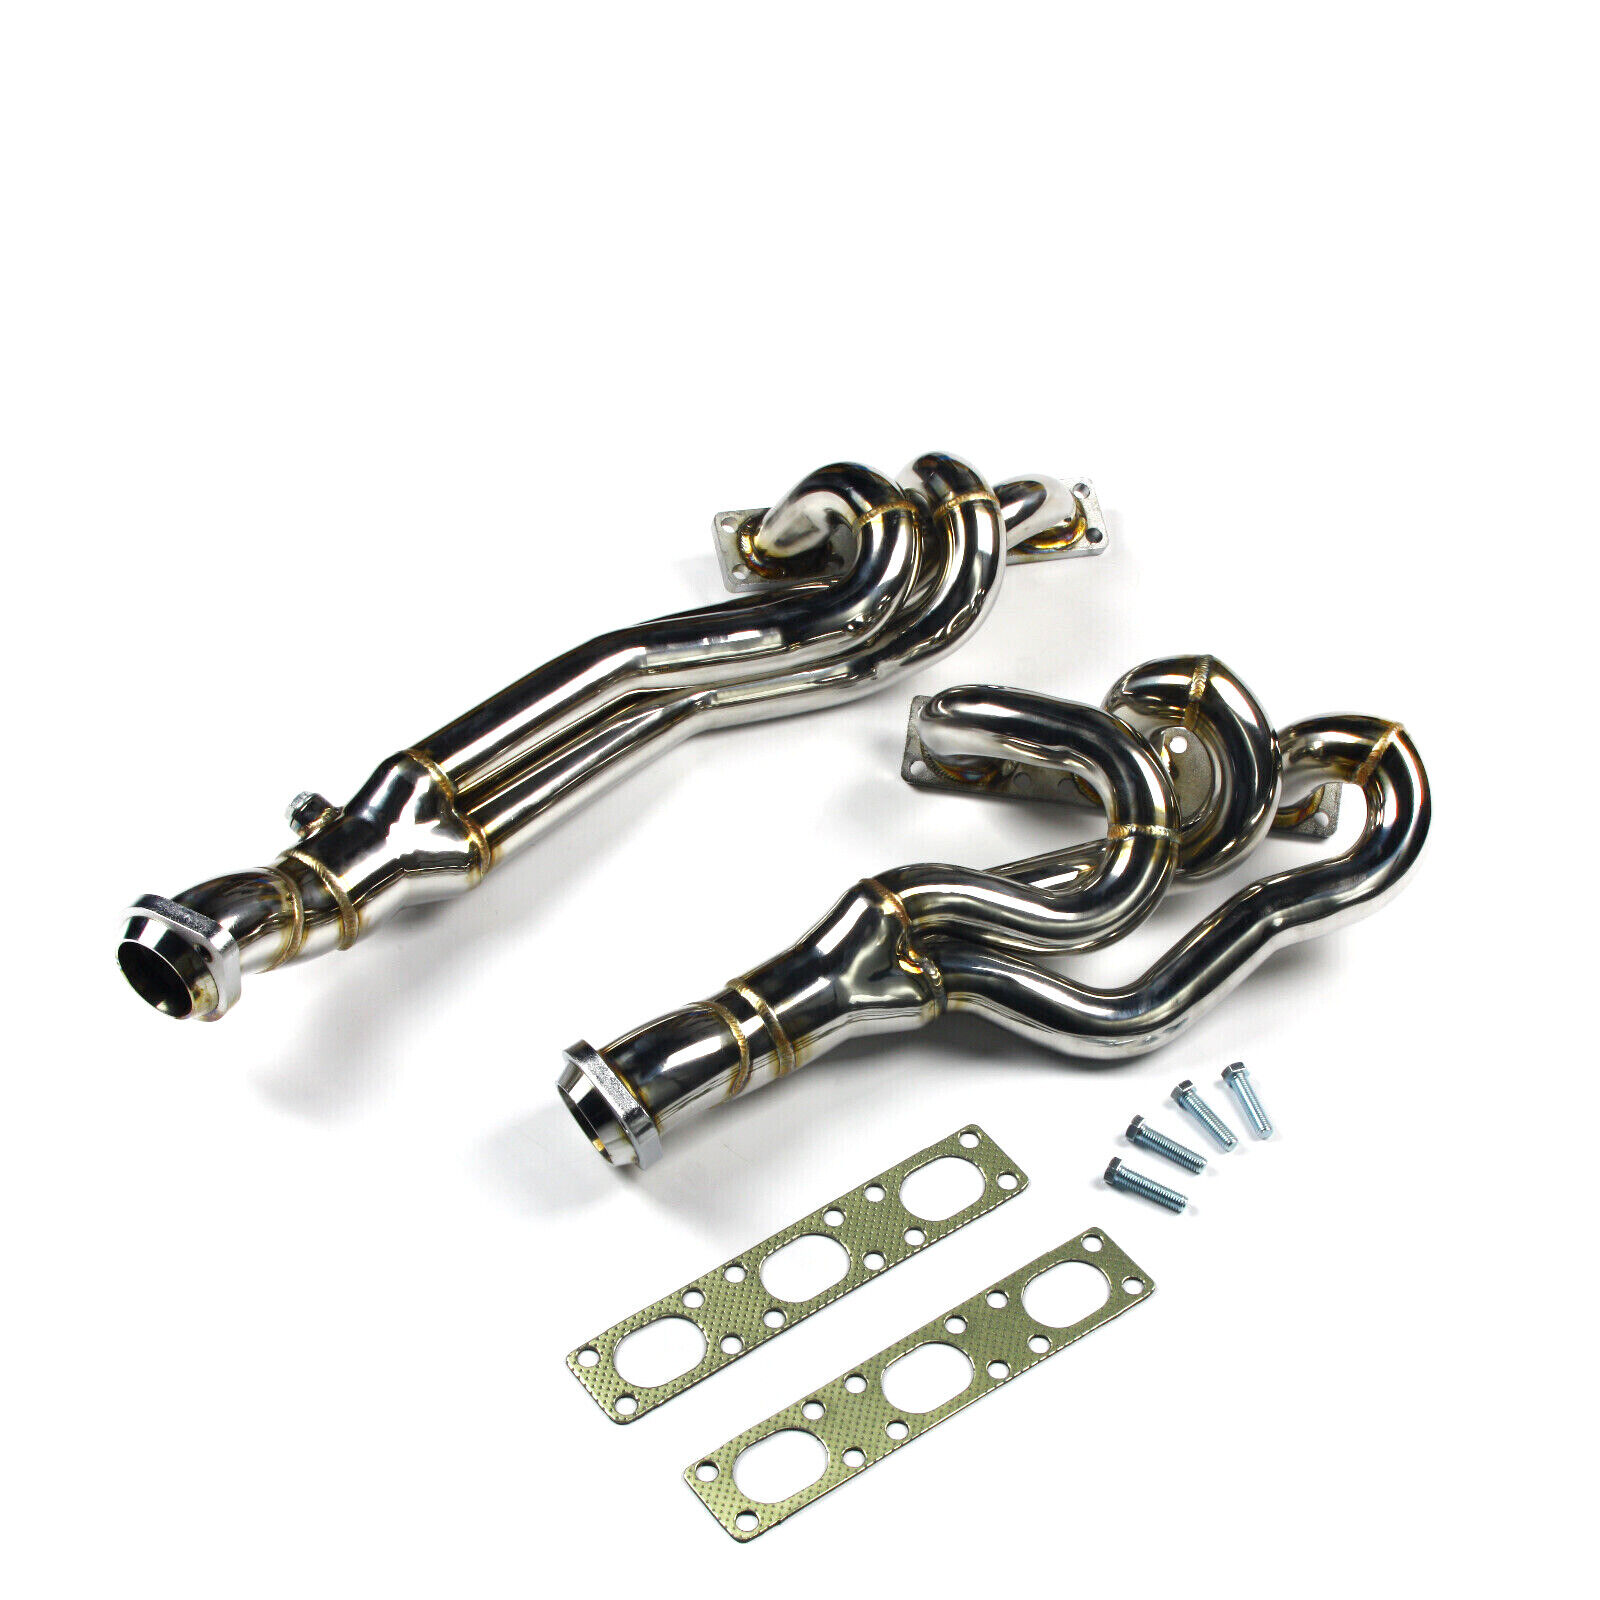 Exhaust Headers For Bmw E46 M52/m54 B25 B30 325i 330i Manifolds Left Hand 304ss